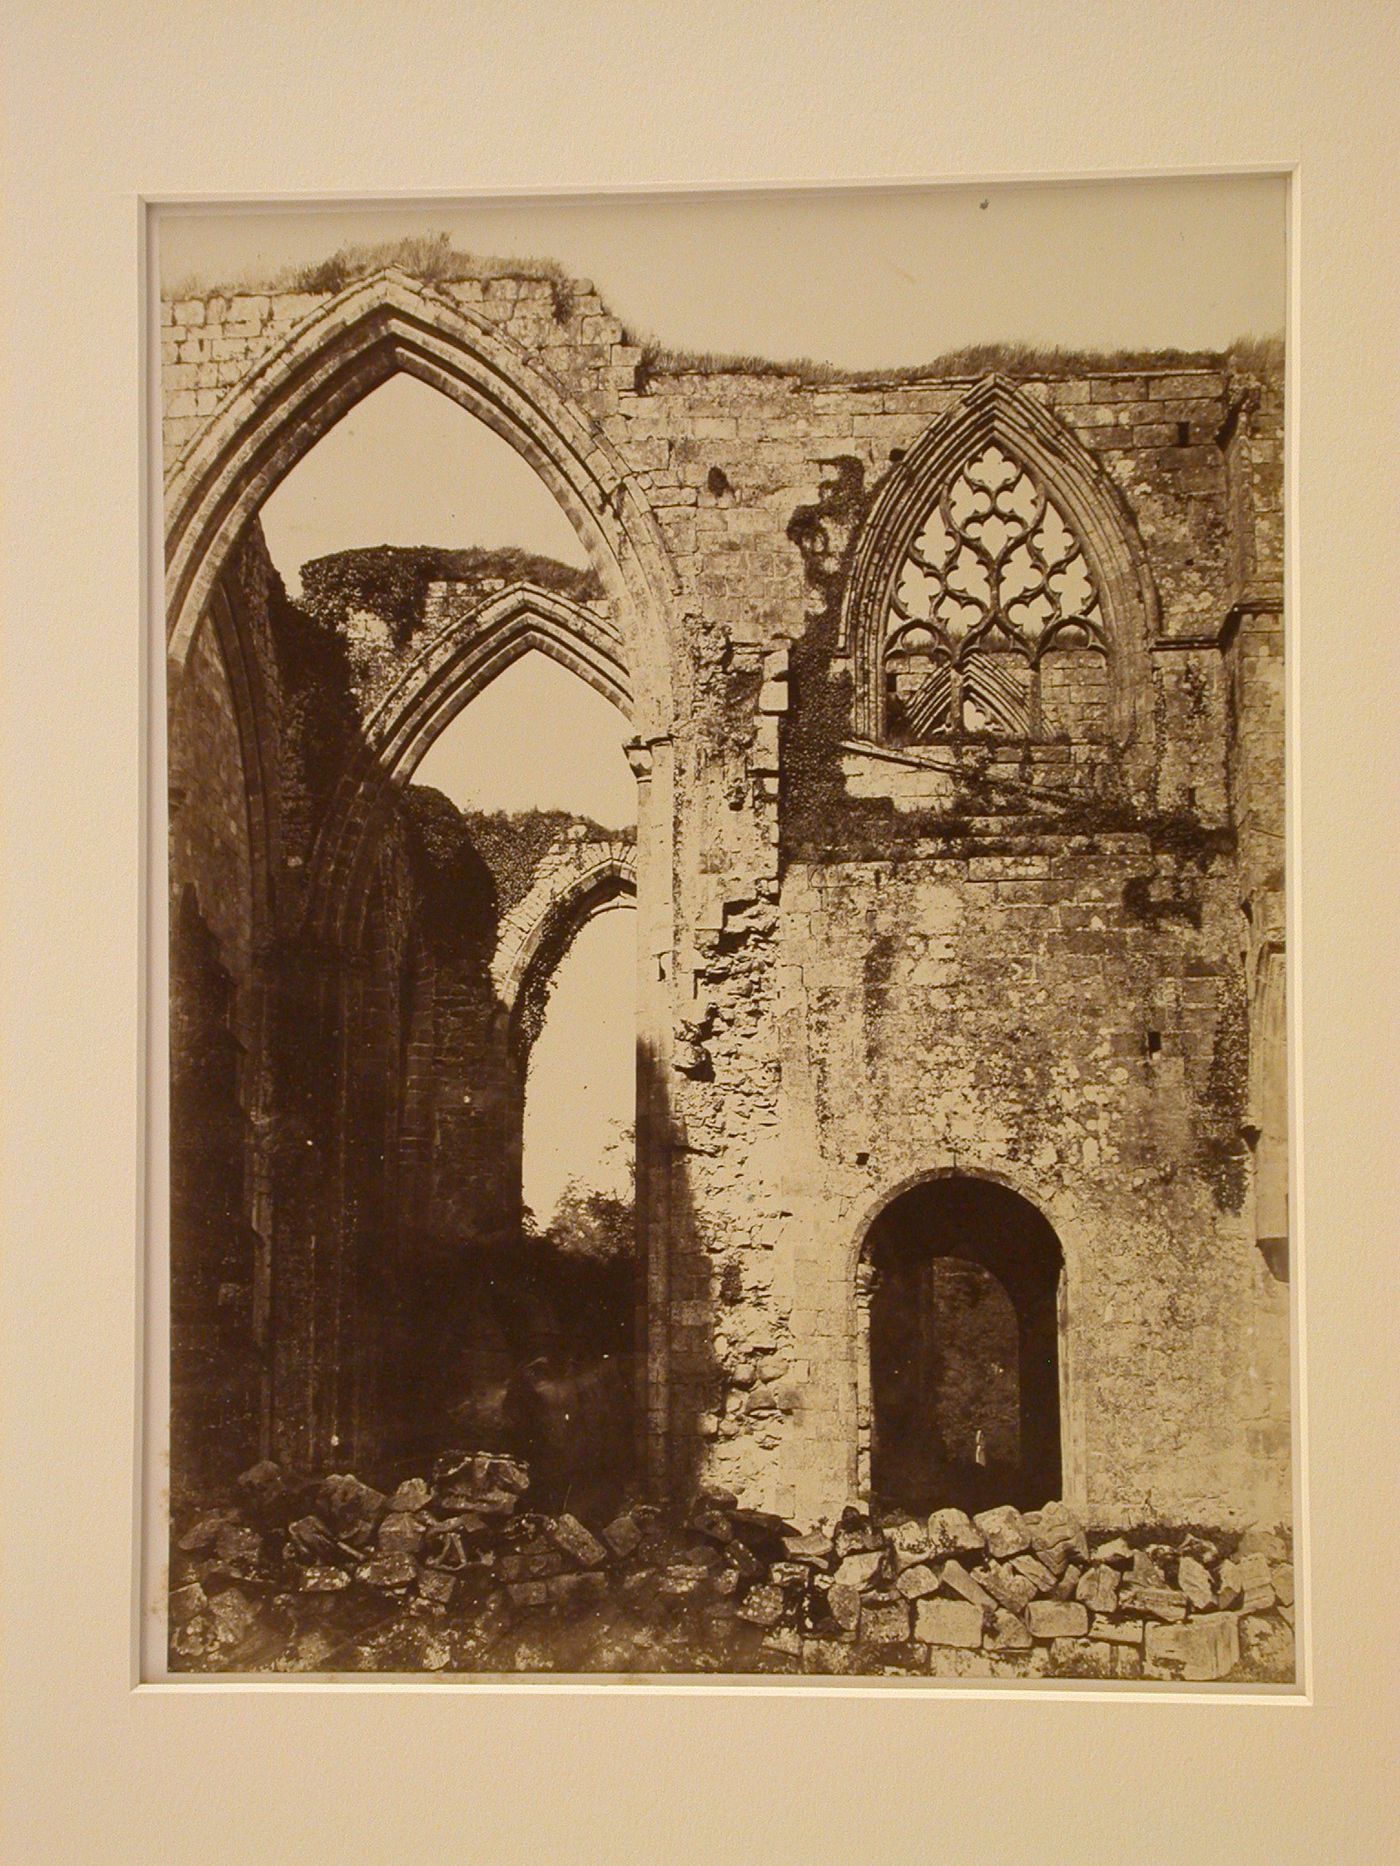 View of unidentified ruined cathedral or abbey, Yorkshire, England